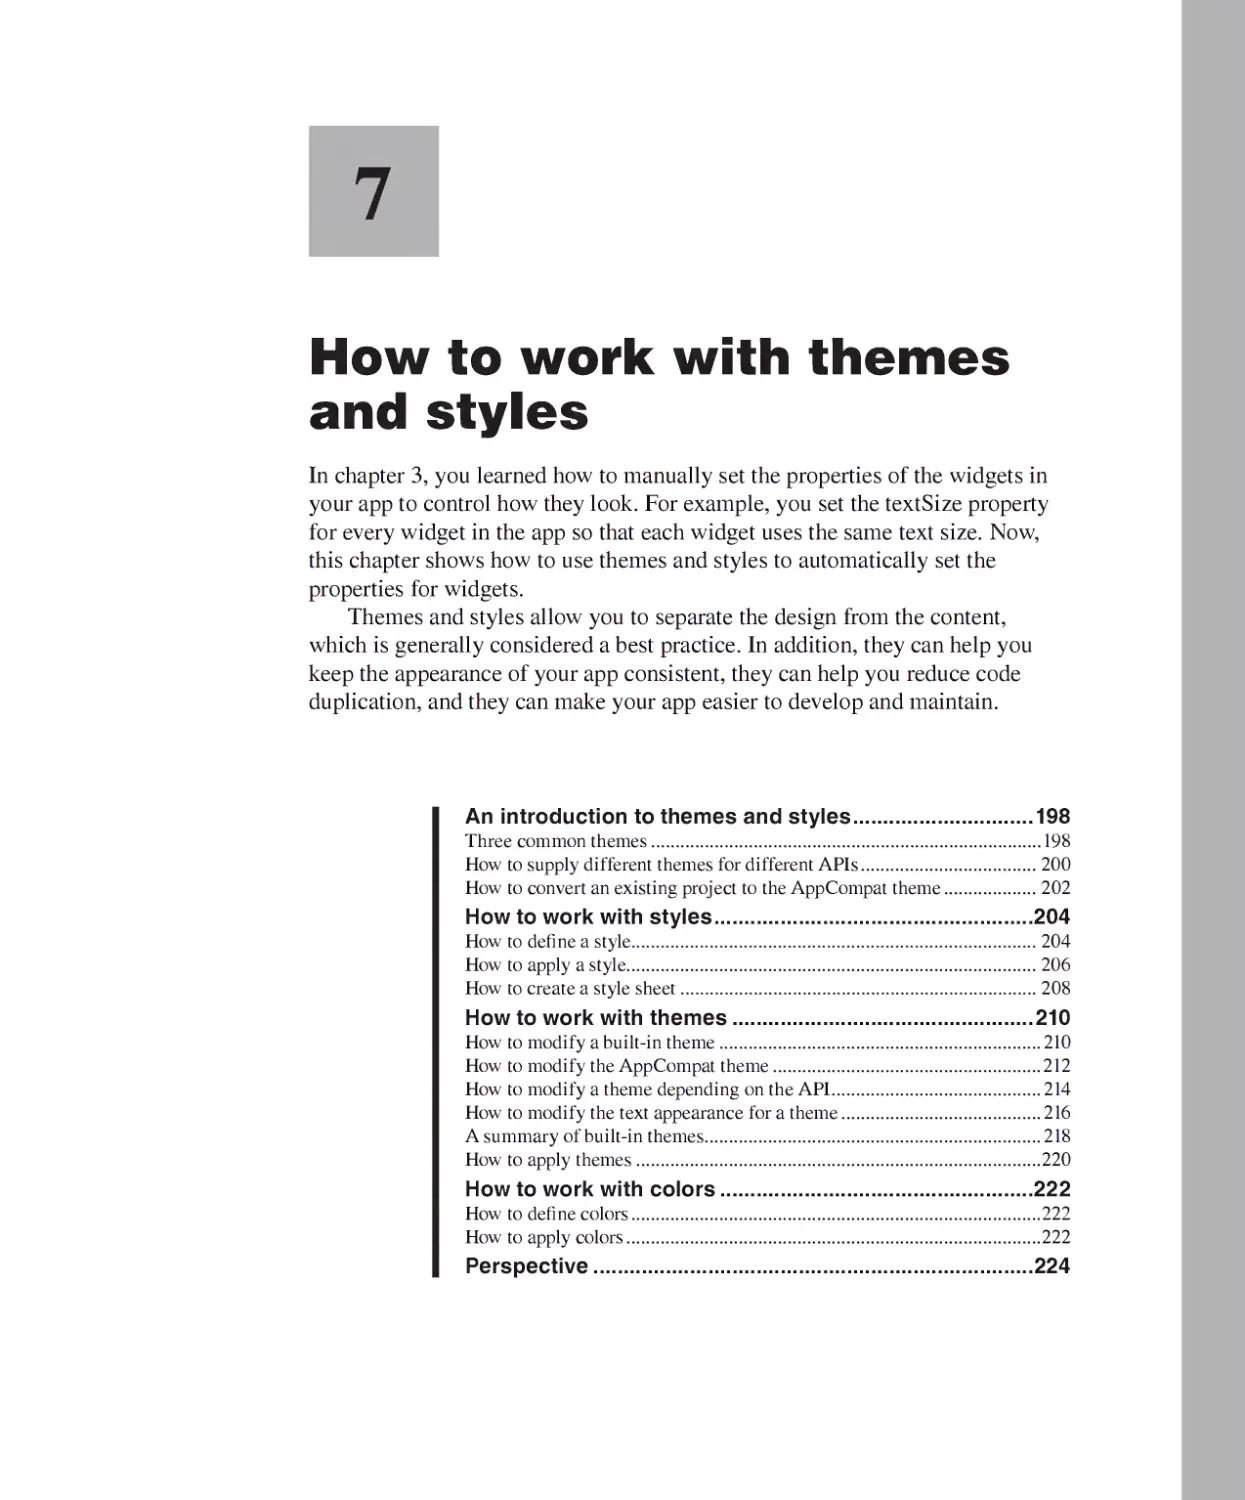 Chapter 7 - How to Work with Themes and Styles